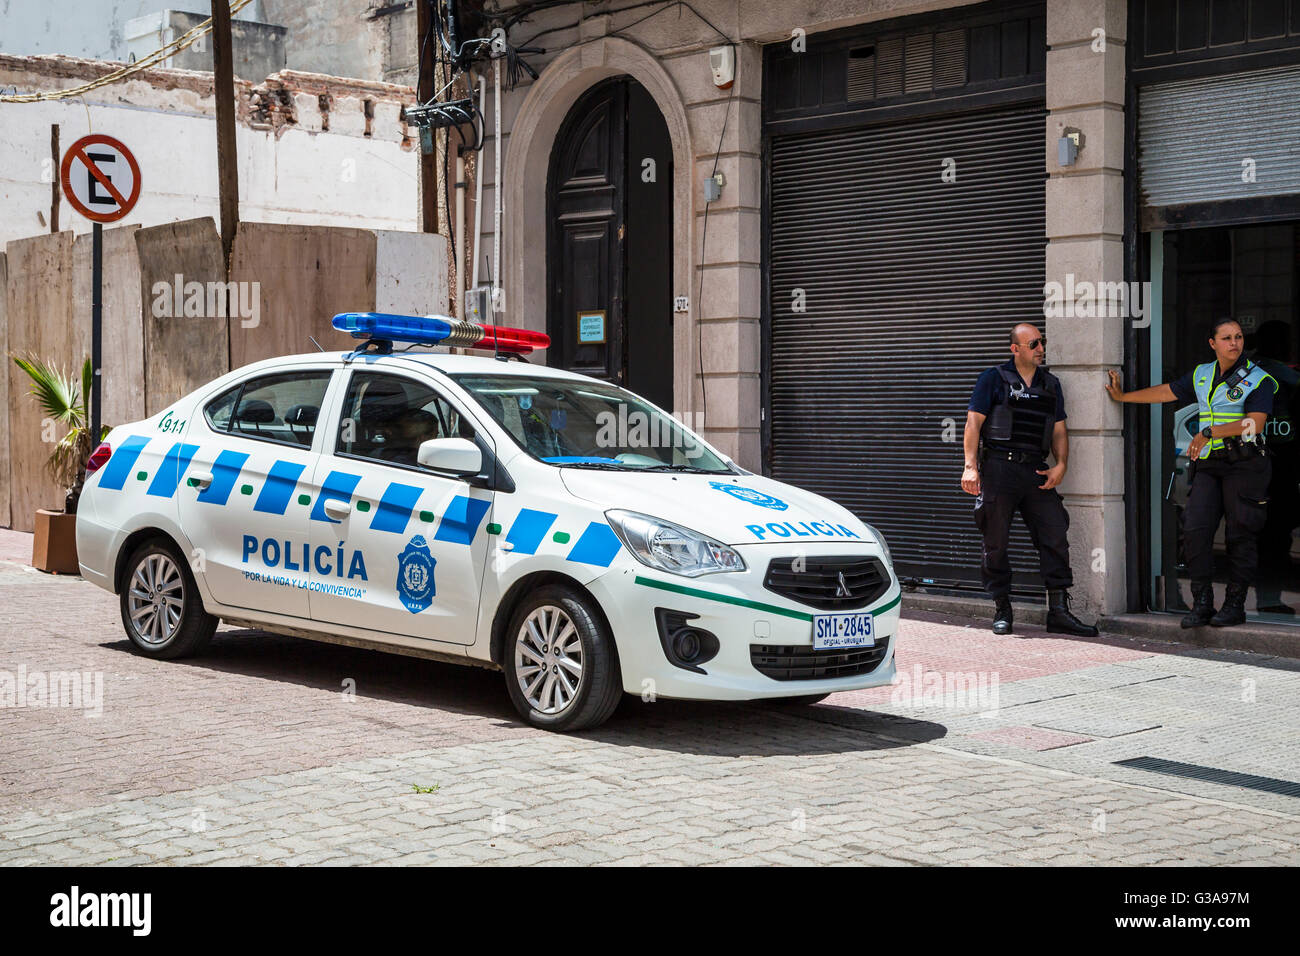 A street scene with police car in Montevideo, Uruguay, South America. Stock Photo